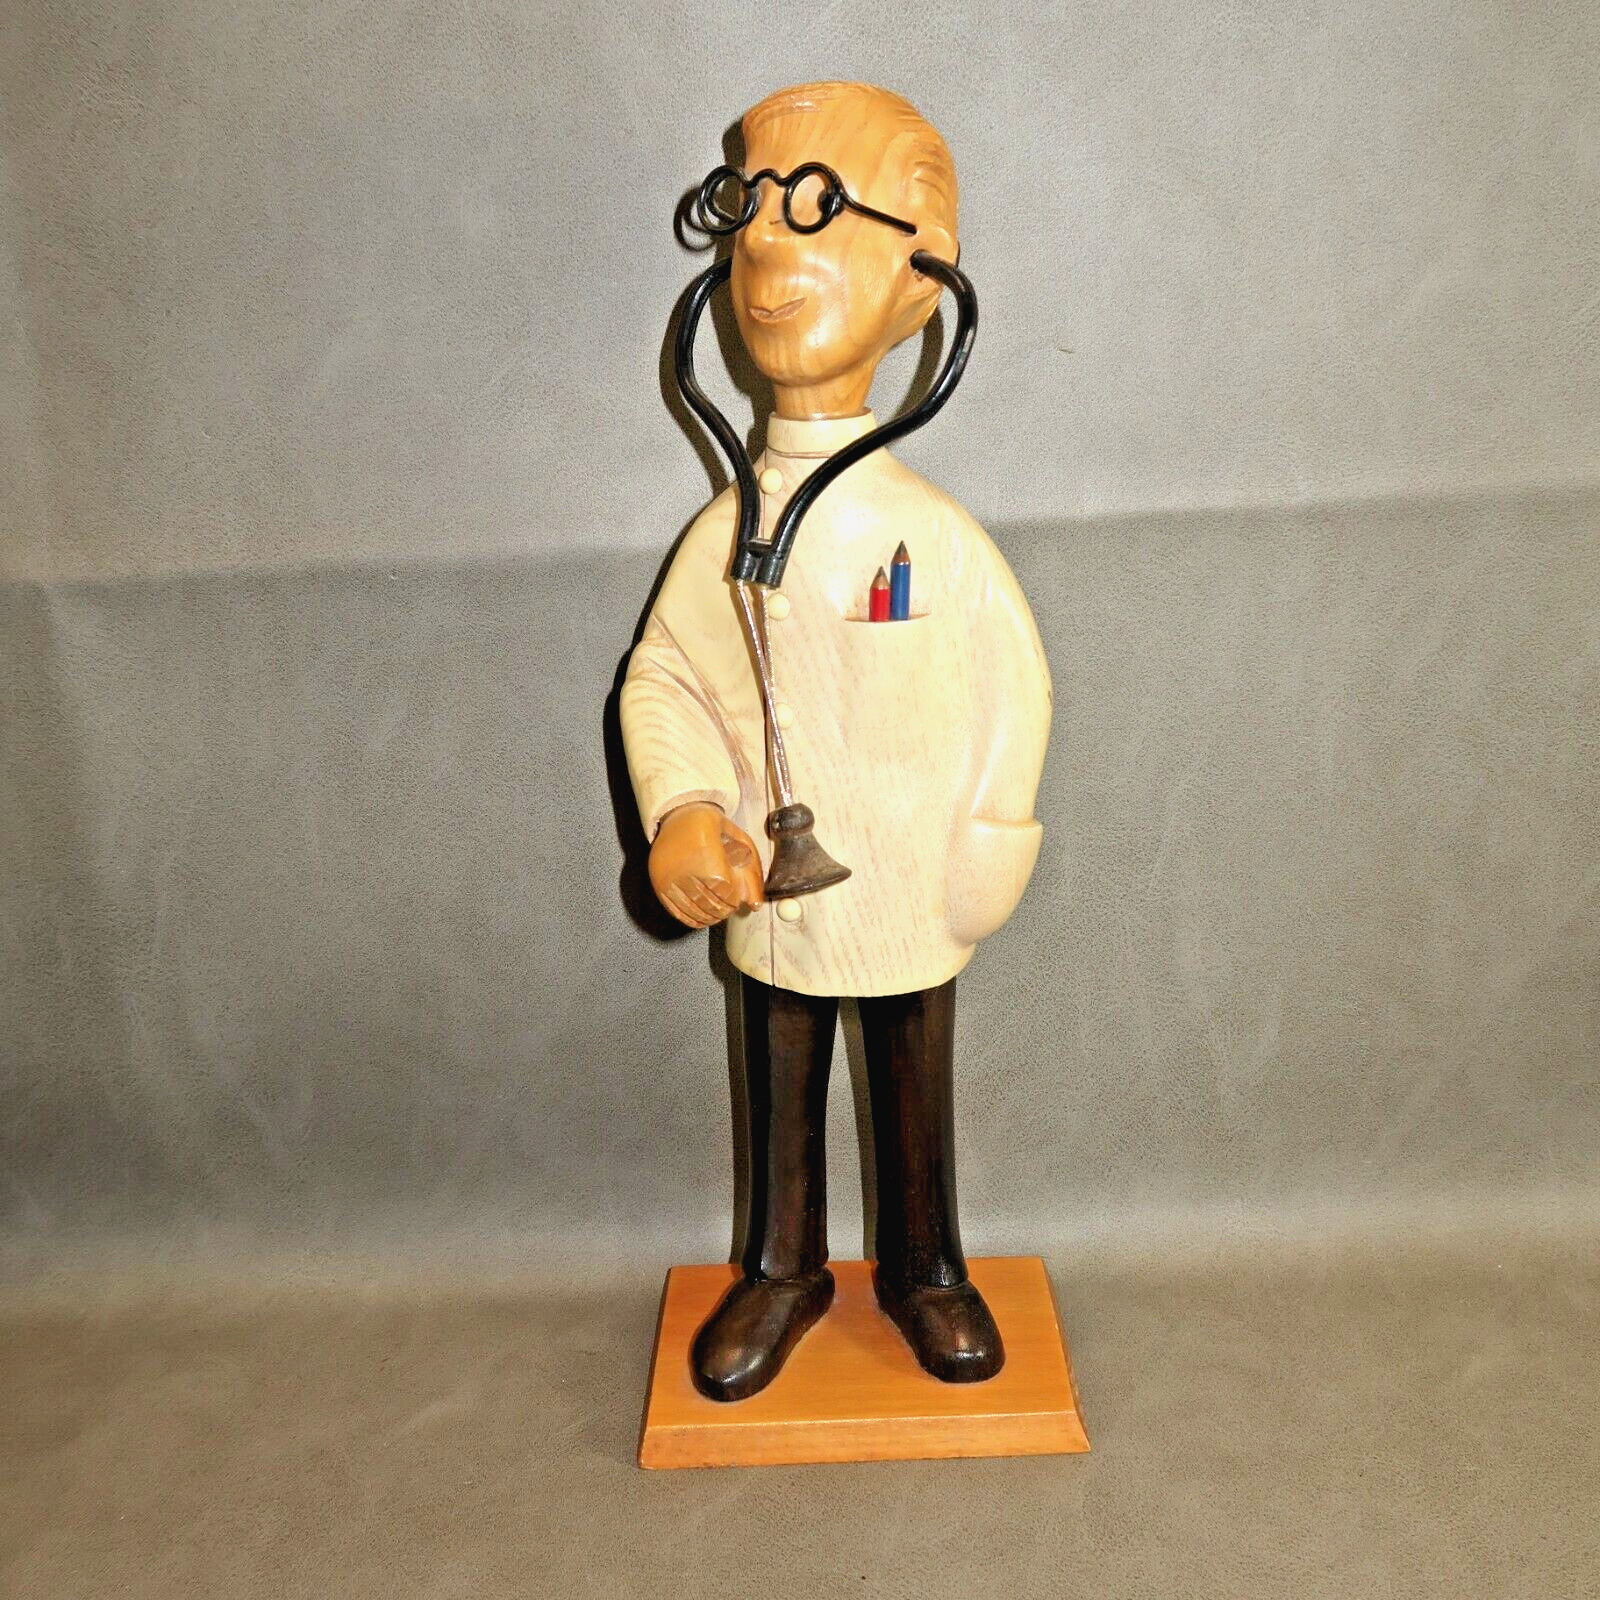 VTG Romer Hand Carved Wood Doctor Figurine w Stethoscope Glasses Made in Italy